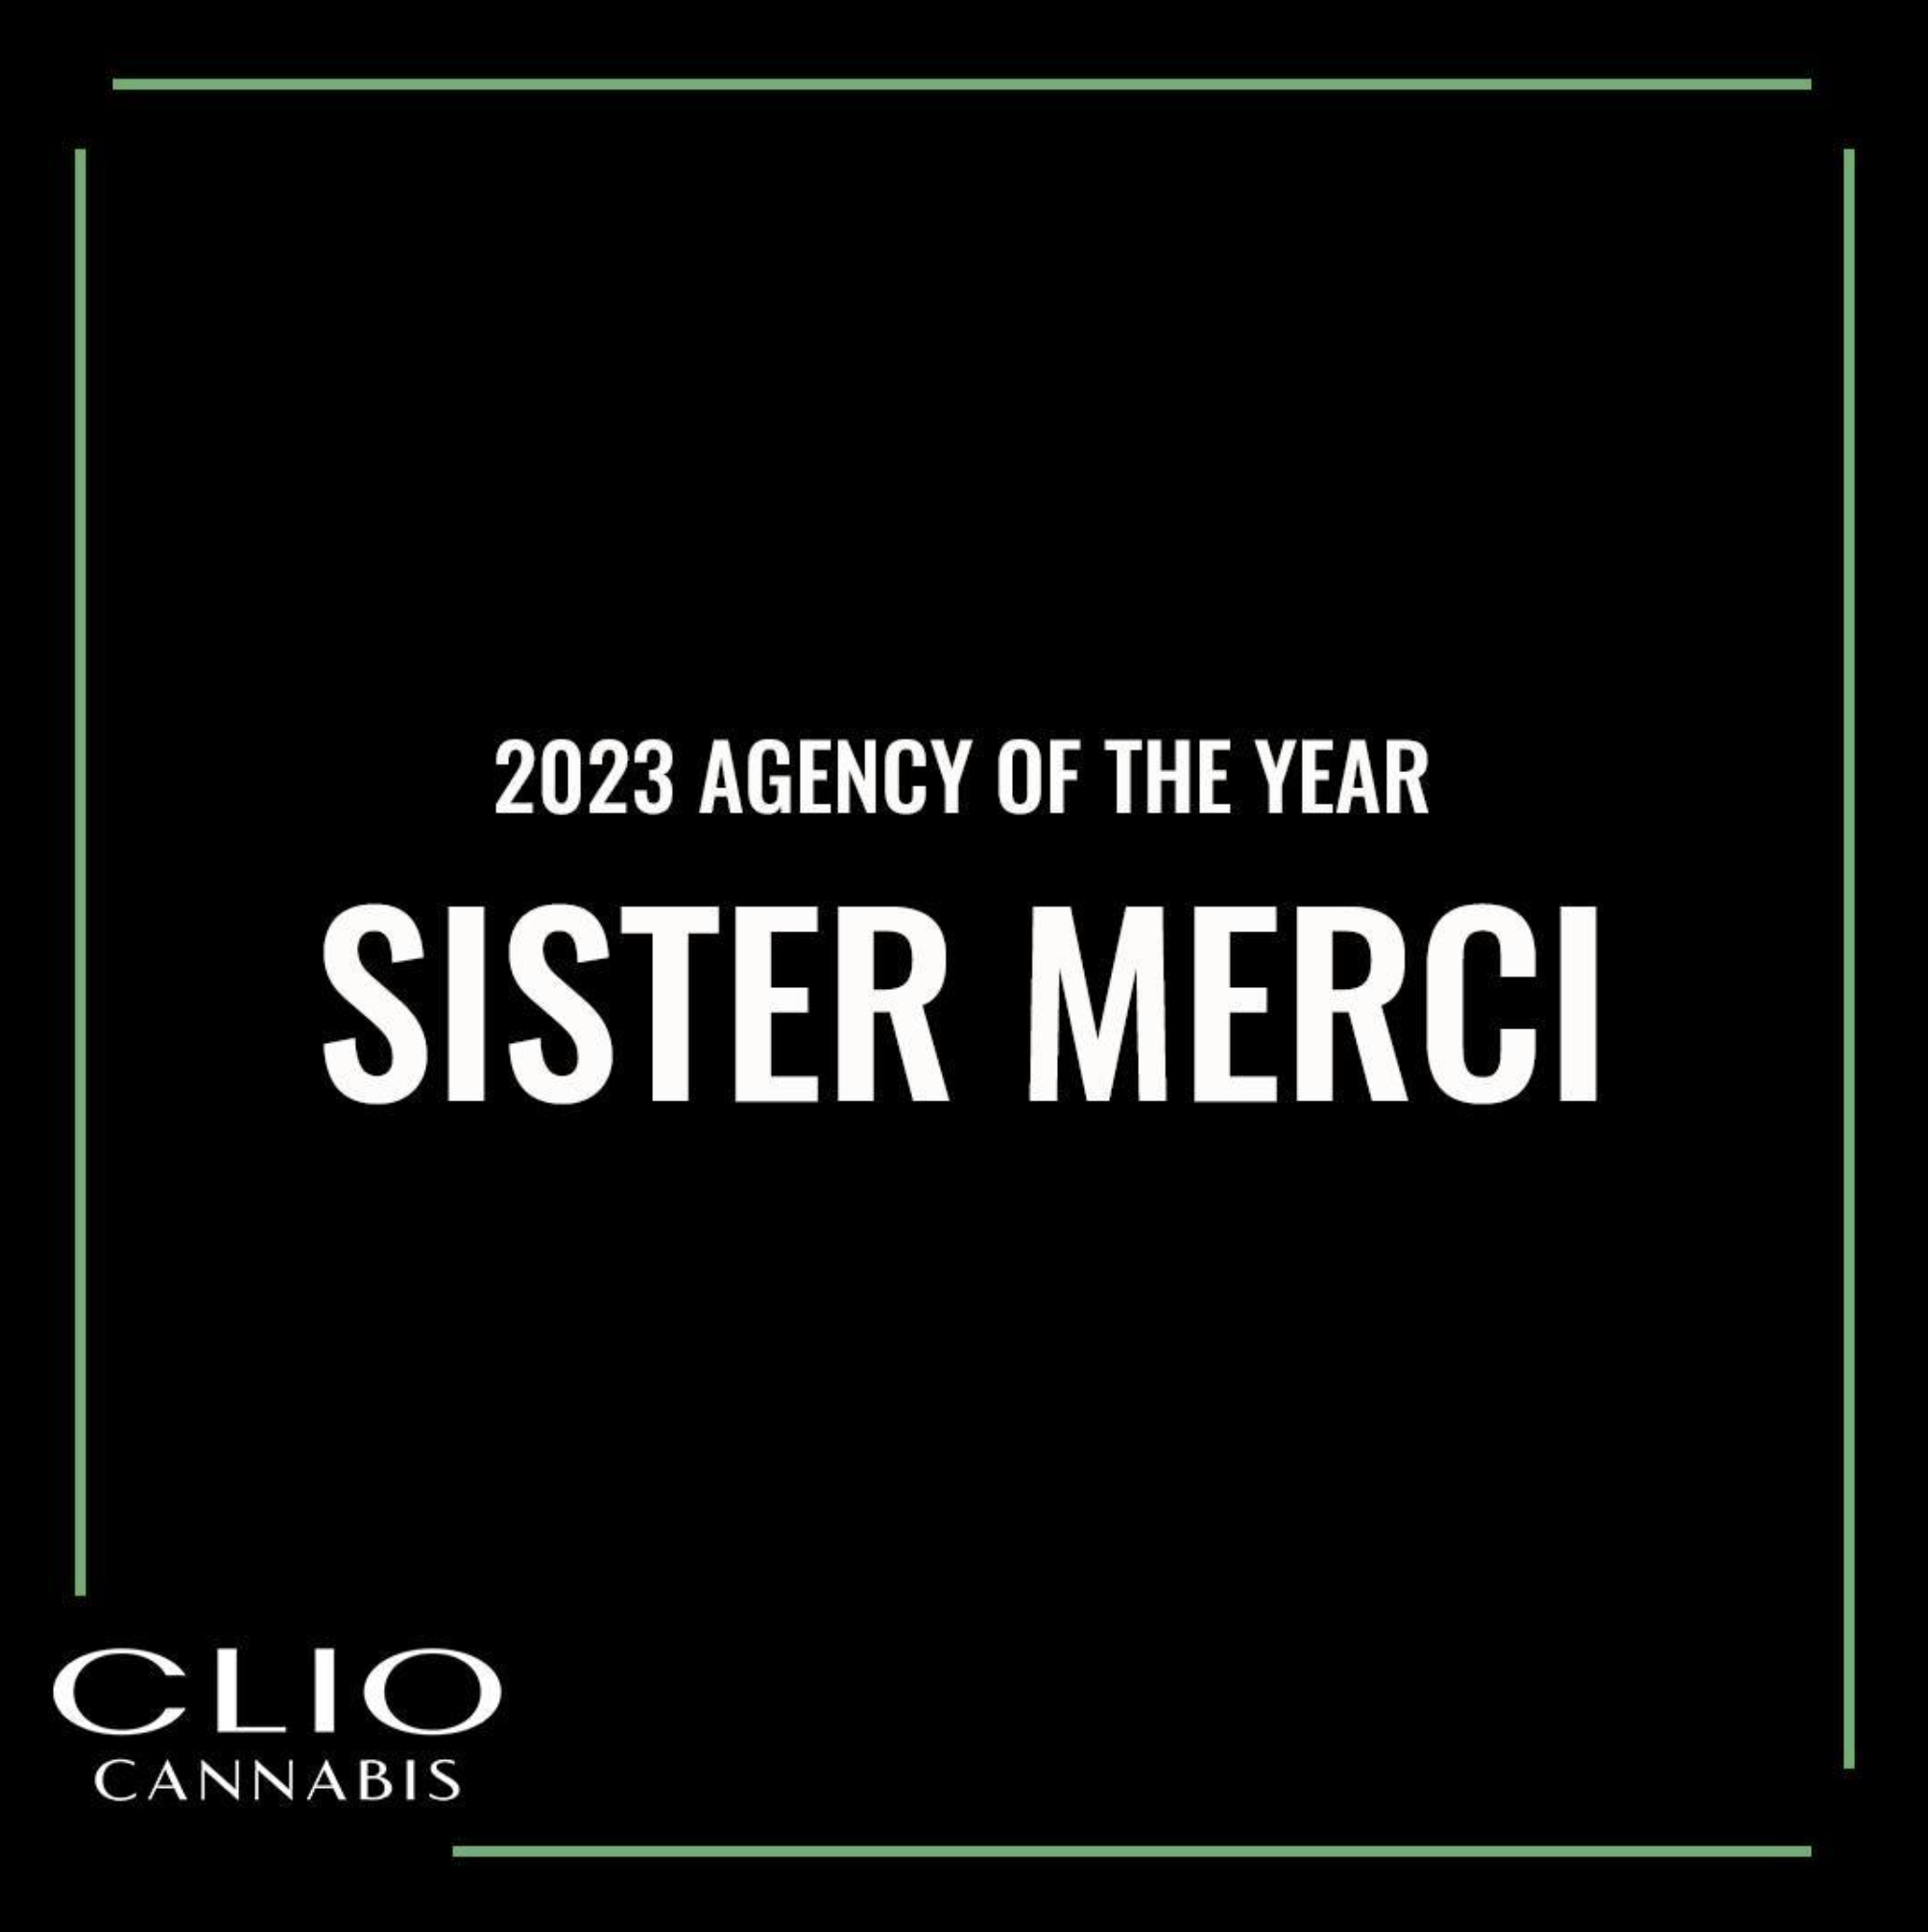 Clio_Cannabis_Awards_2023_Agency_of_the_year